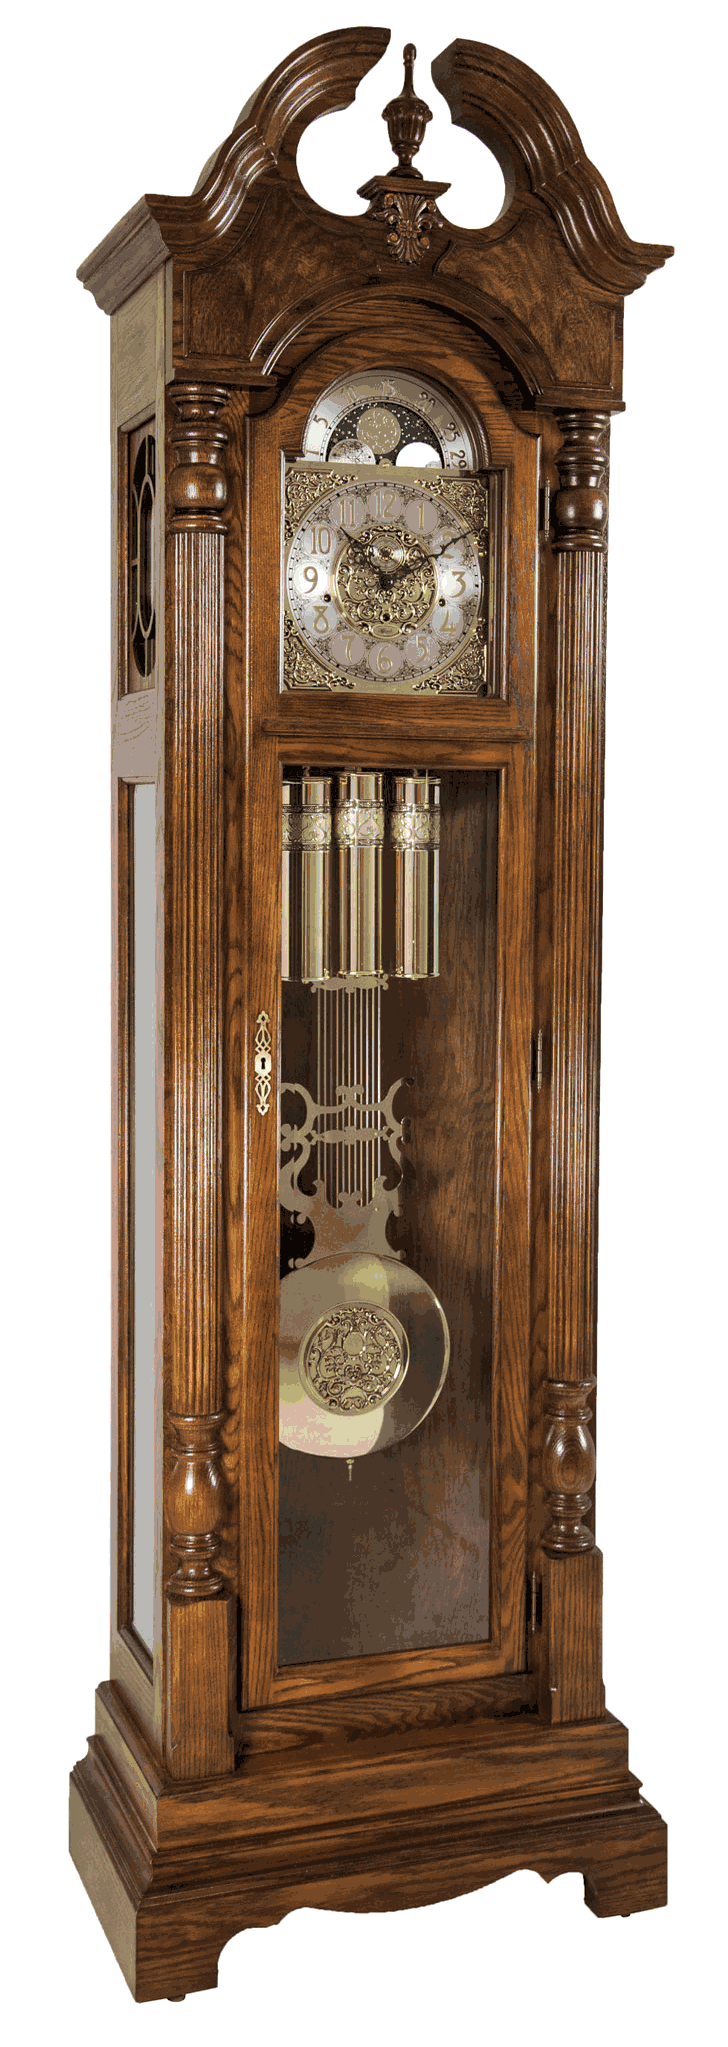 Blakely Grandfather Clock by Hermle Clocks